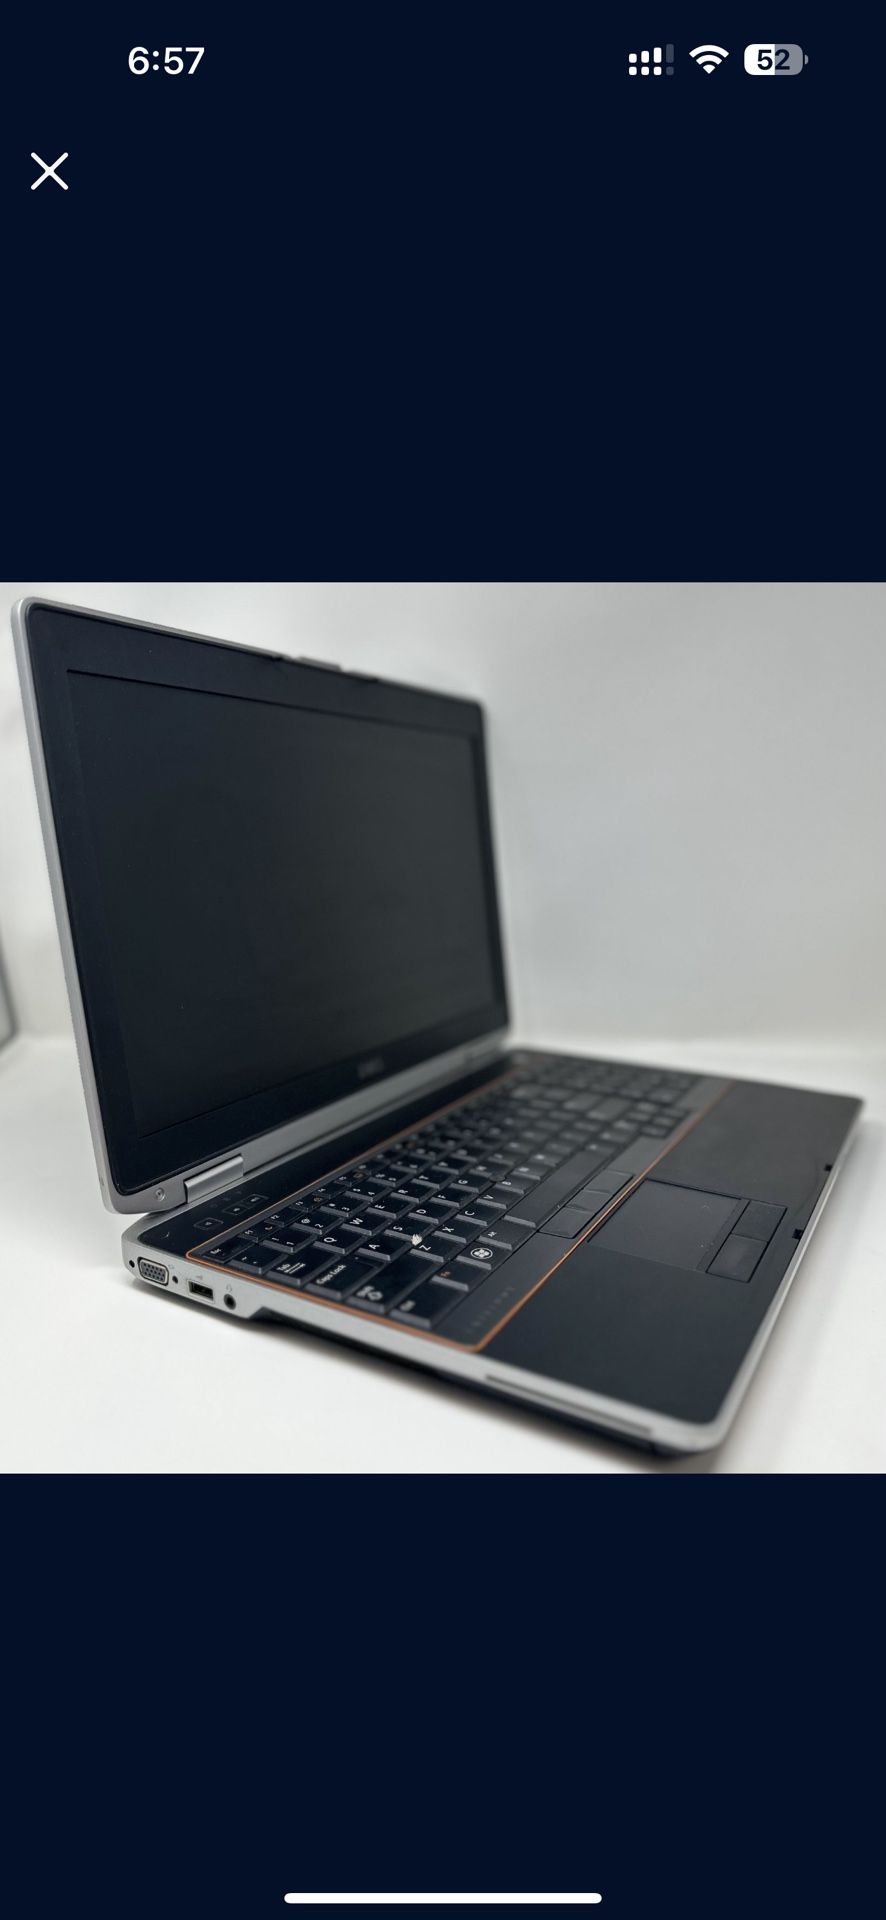 Dell E6520 Intel Core i7 12GB RAM 120GB SSD in very good condition ready for work or school